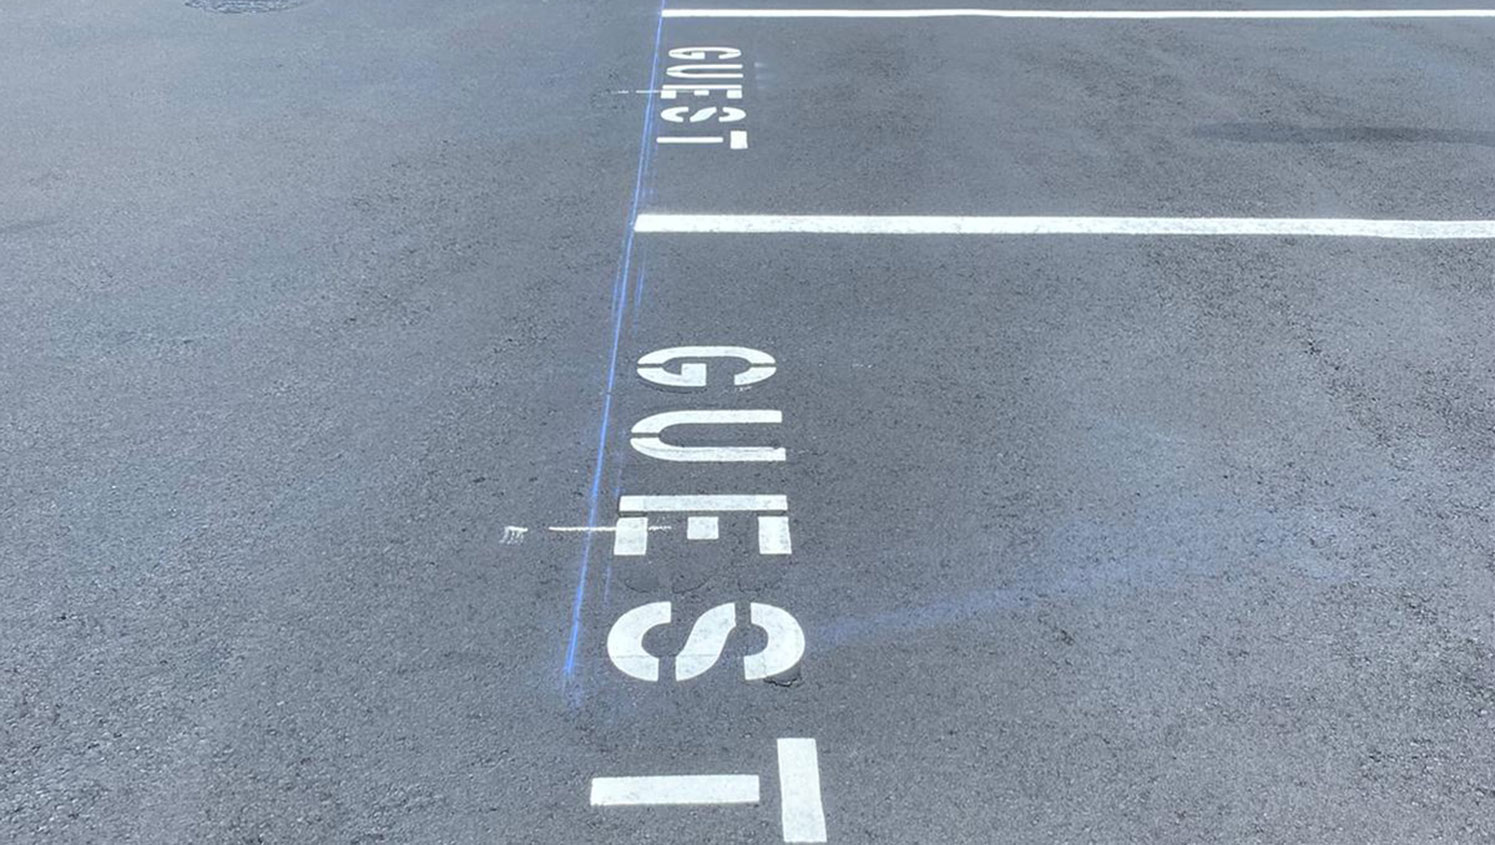 guest parking space re-striping layout in Tampa, FL